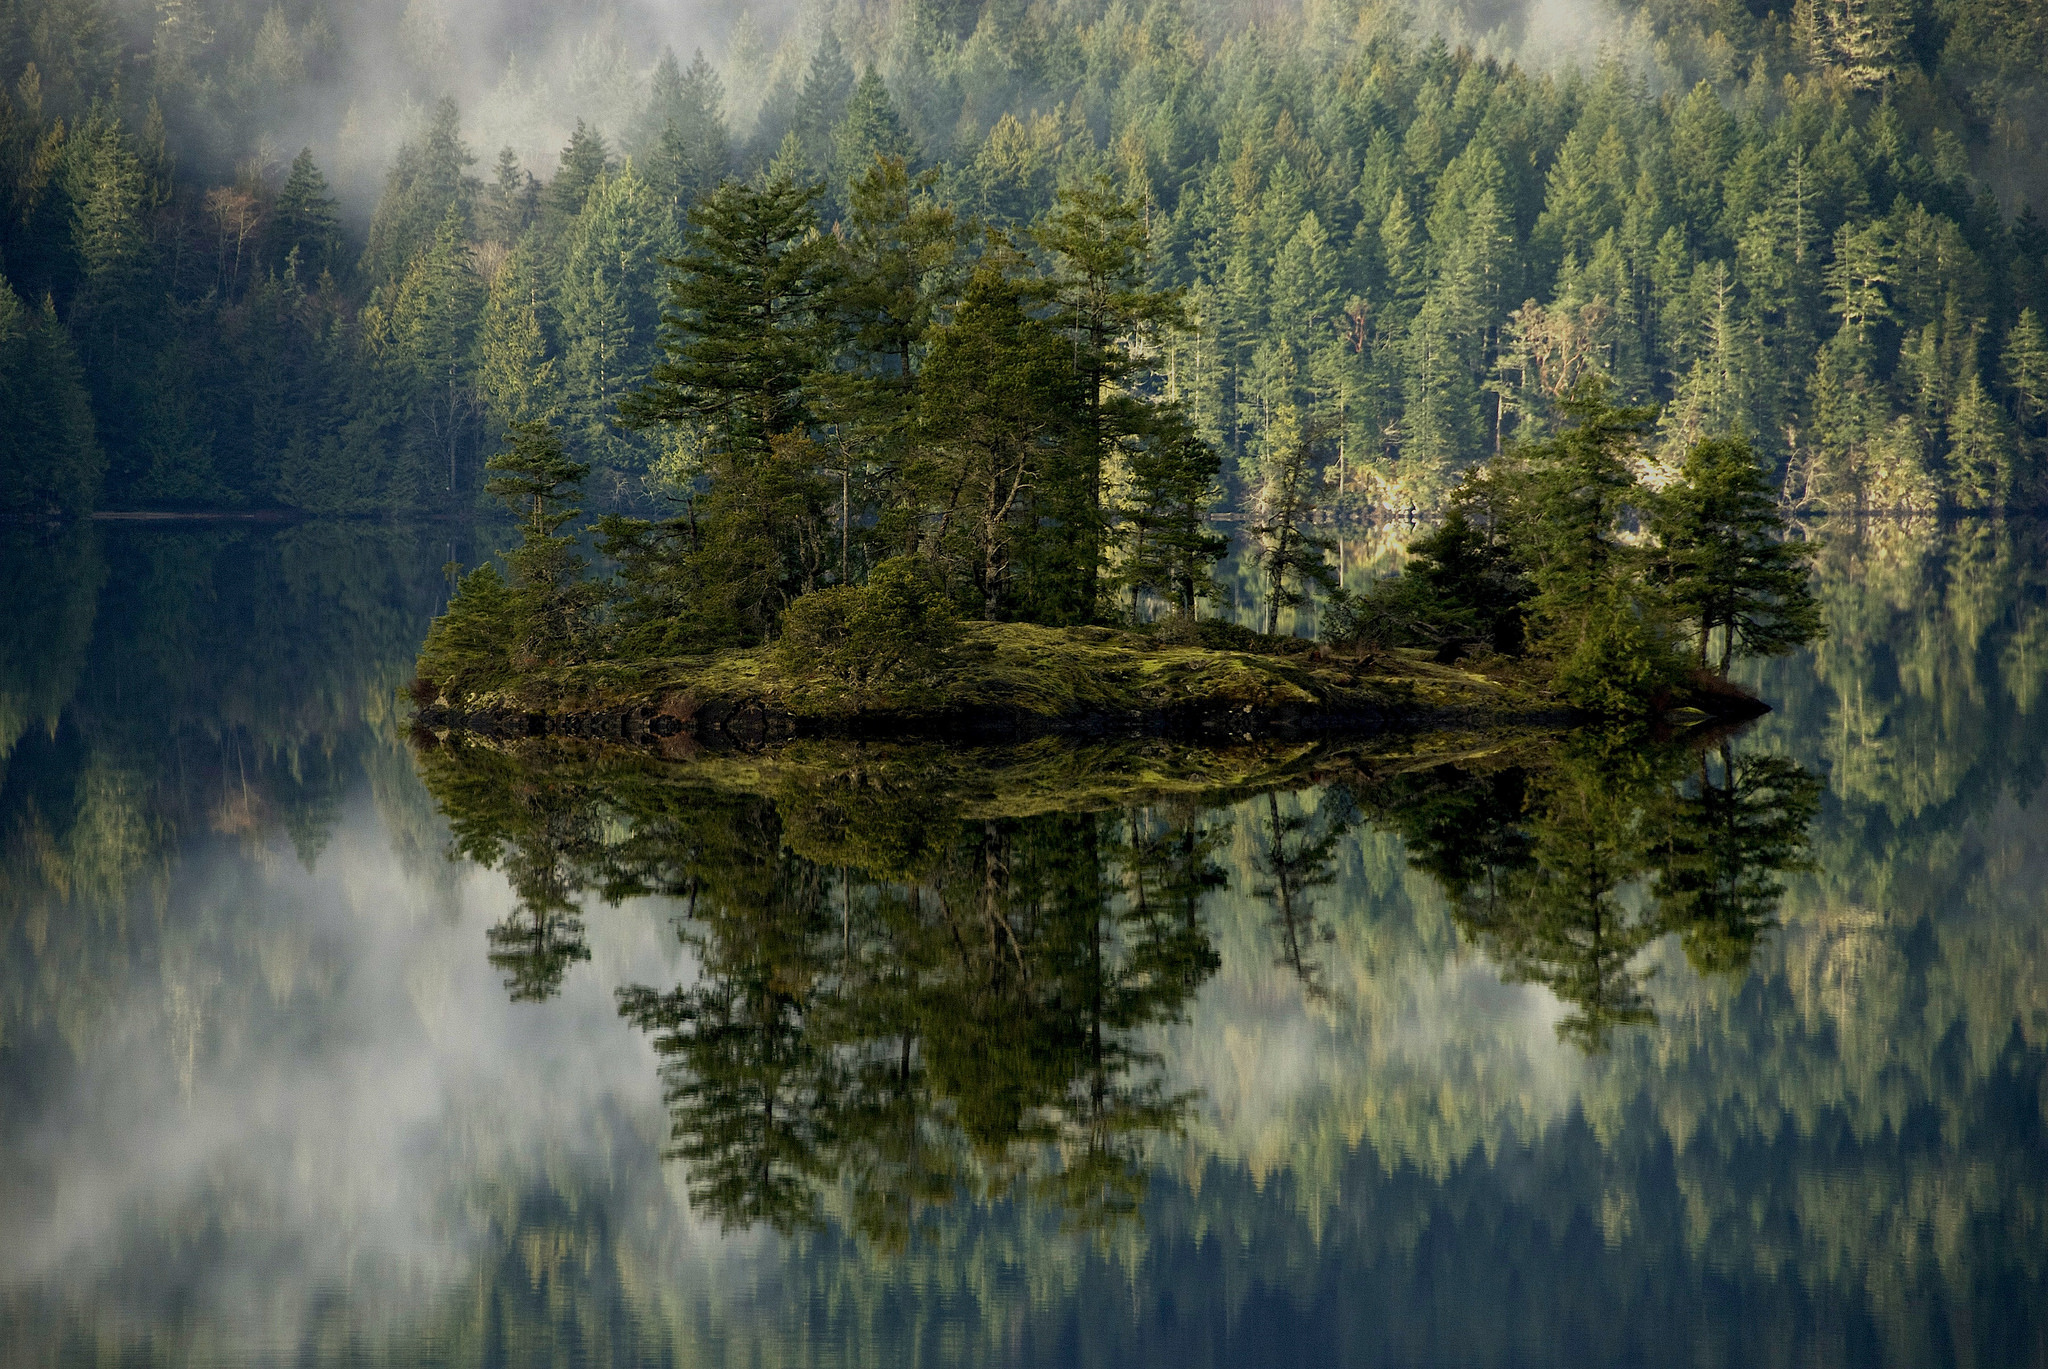 General 2048x1369 forest lake island mist reflection